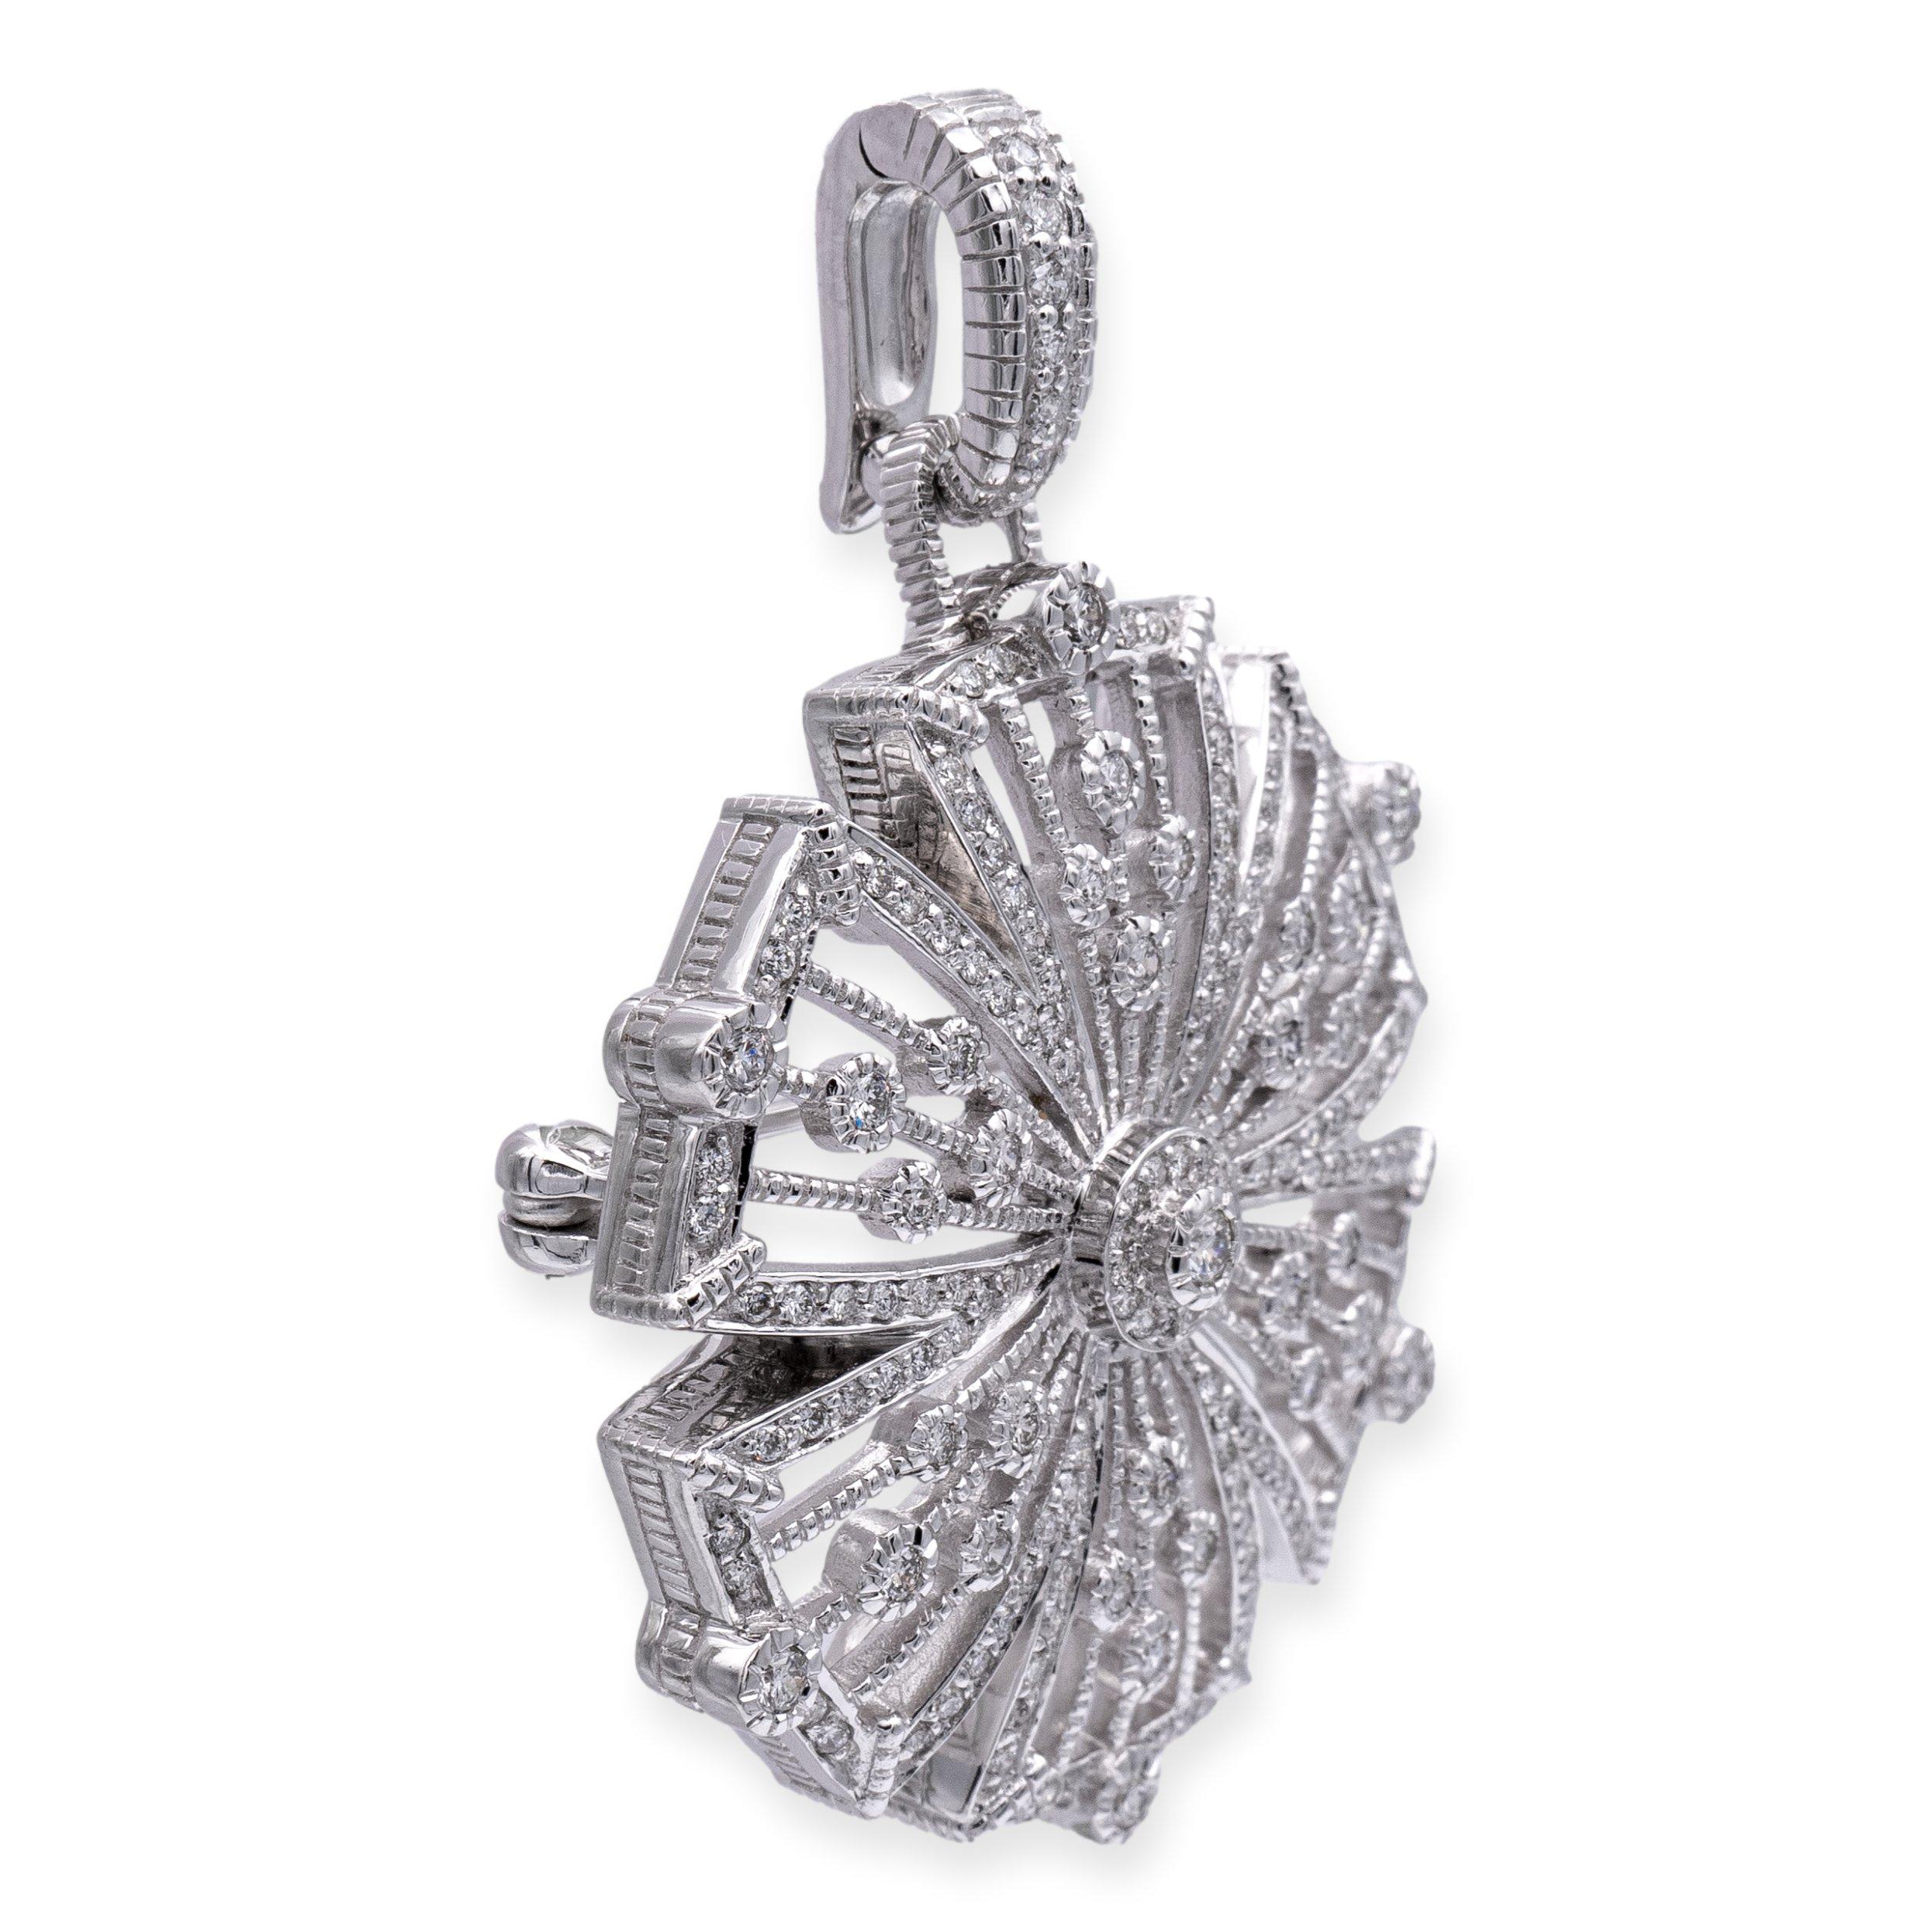 Vintage Judith Ripka brooch finely crafted in 18 karat white gold in an intricate design featuring delicate filigree open scrollwork in the shape of a captivating flower. Adorned with approximately 1.35 carats of round brilliant-cut diamonds, this